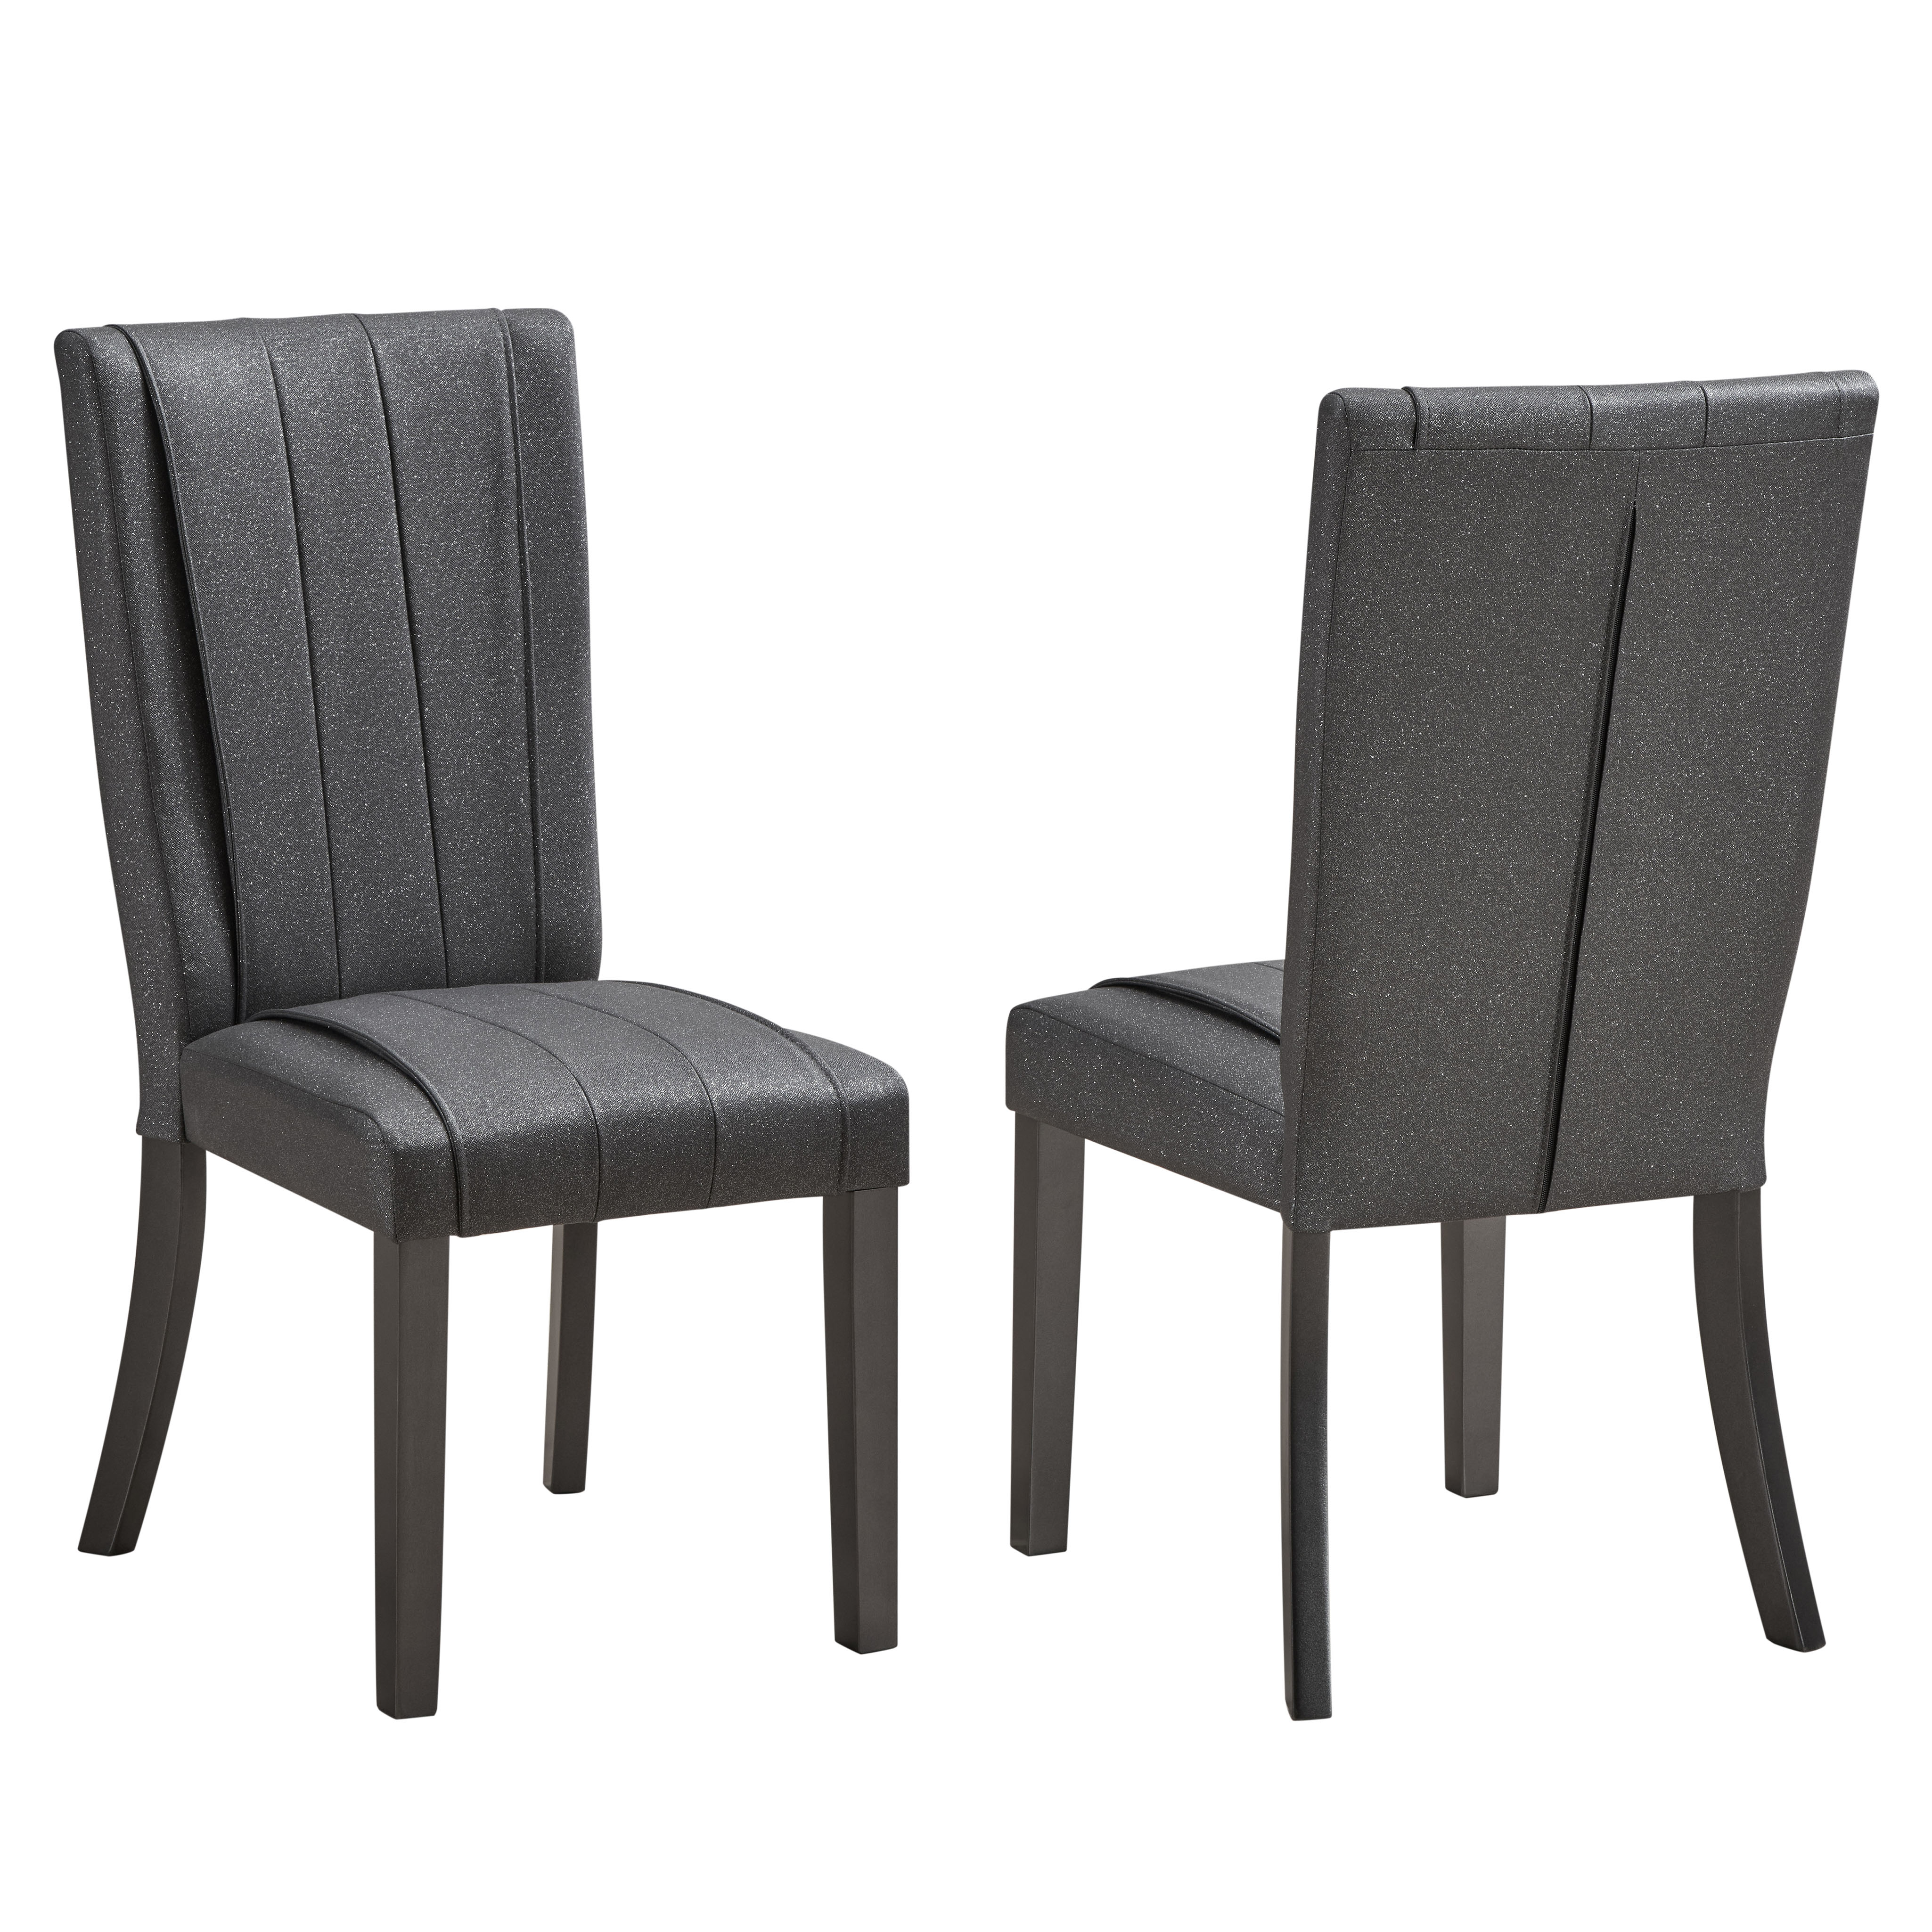 Knox Dining Chairs - Set of 2